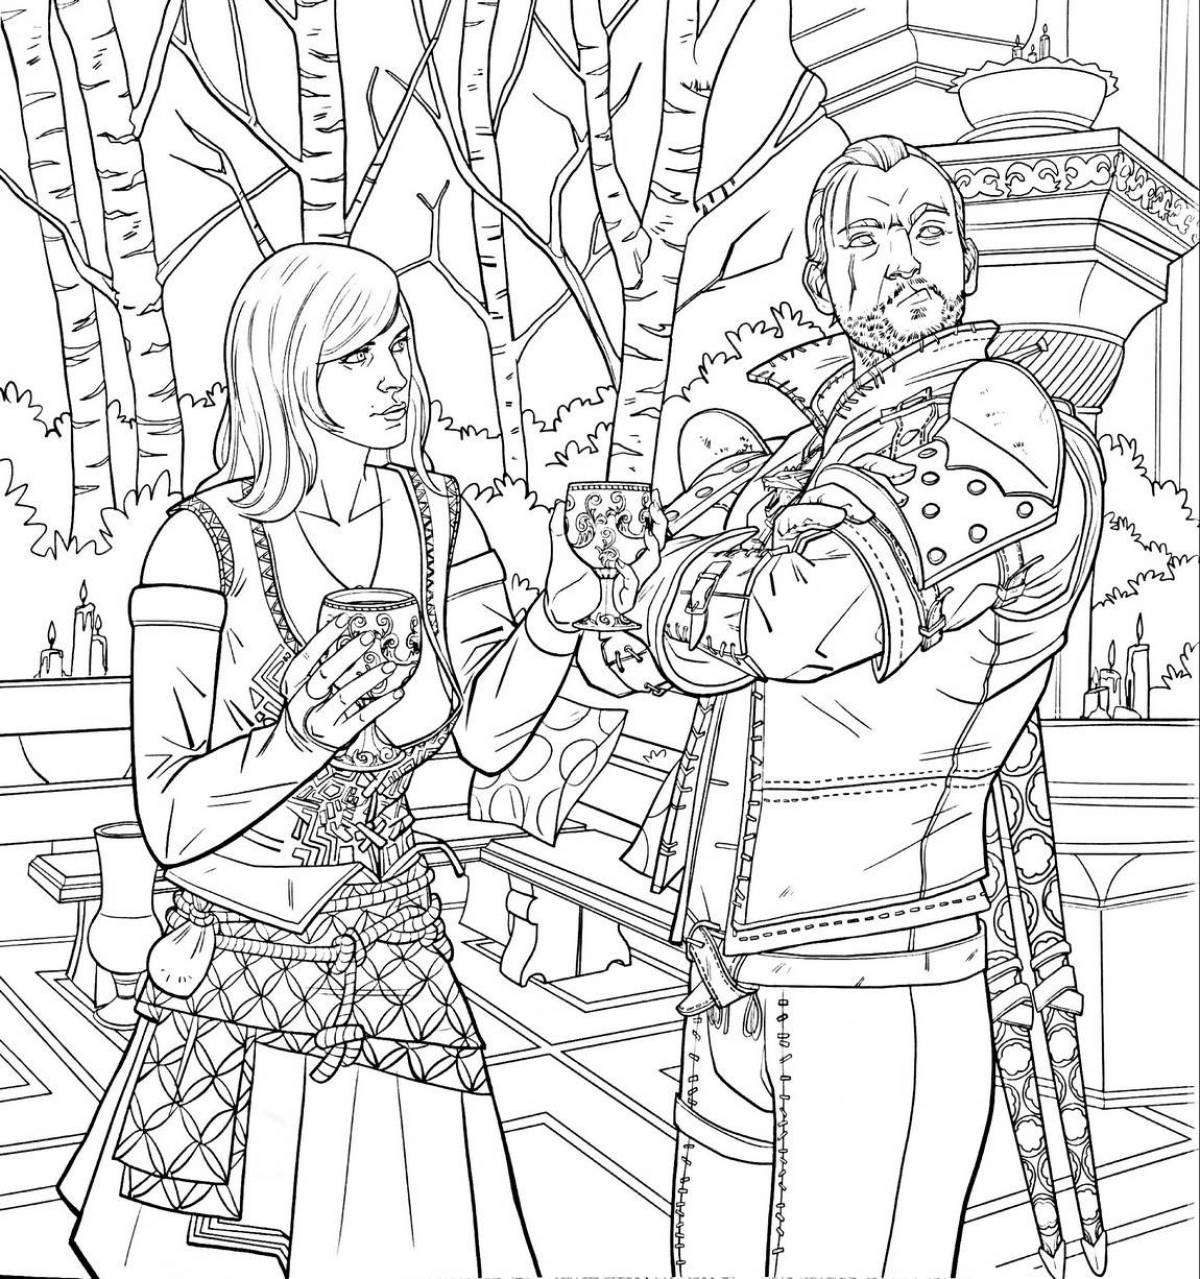 Exquisite witcher coloring book